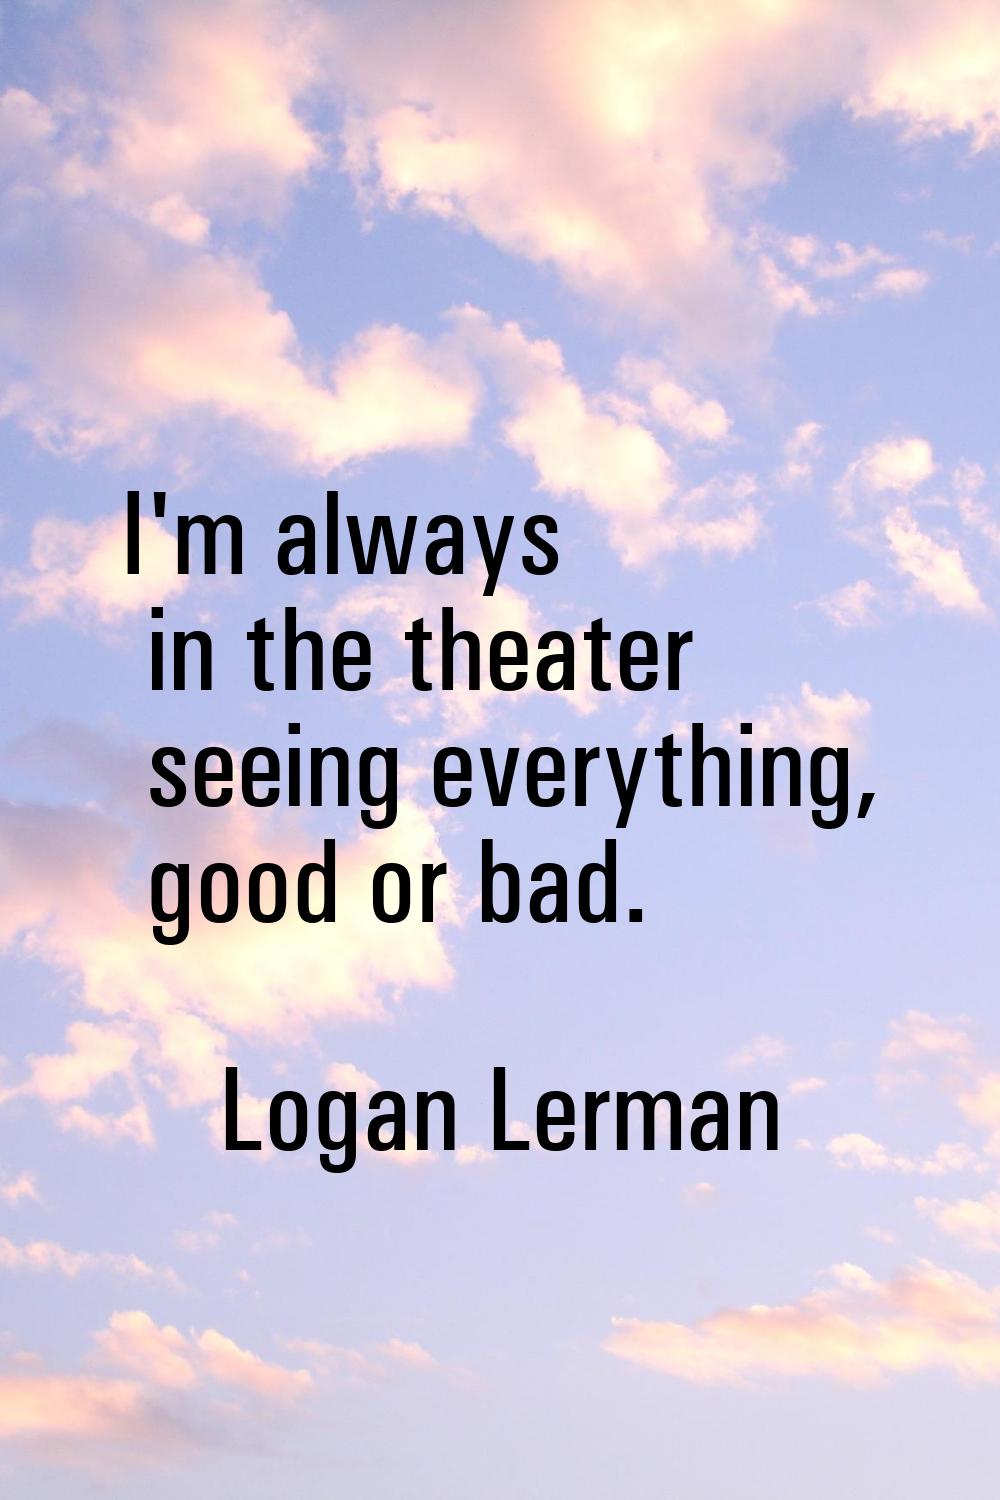 I'm always in the theater seeing everything, good or bad.